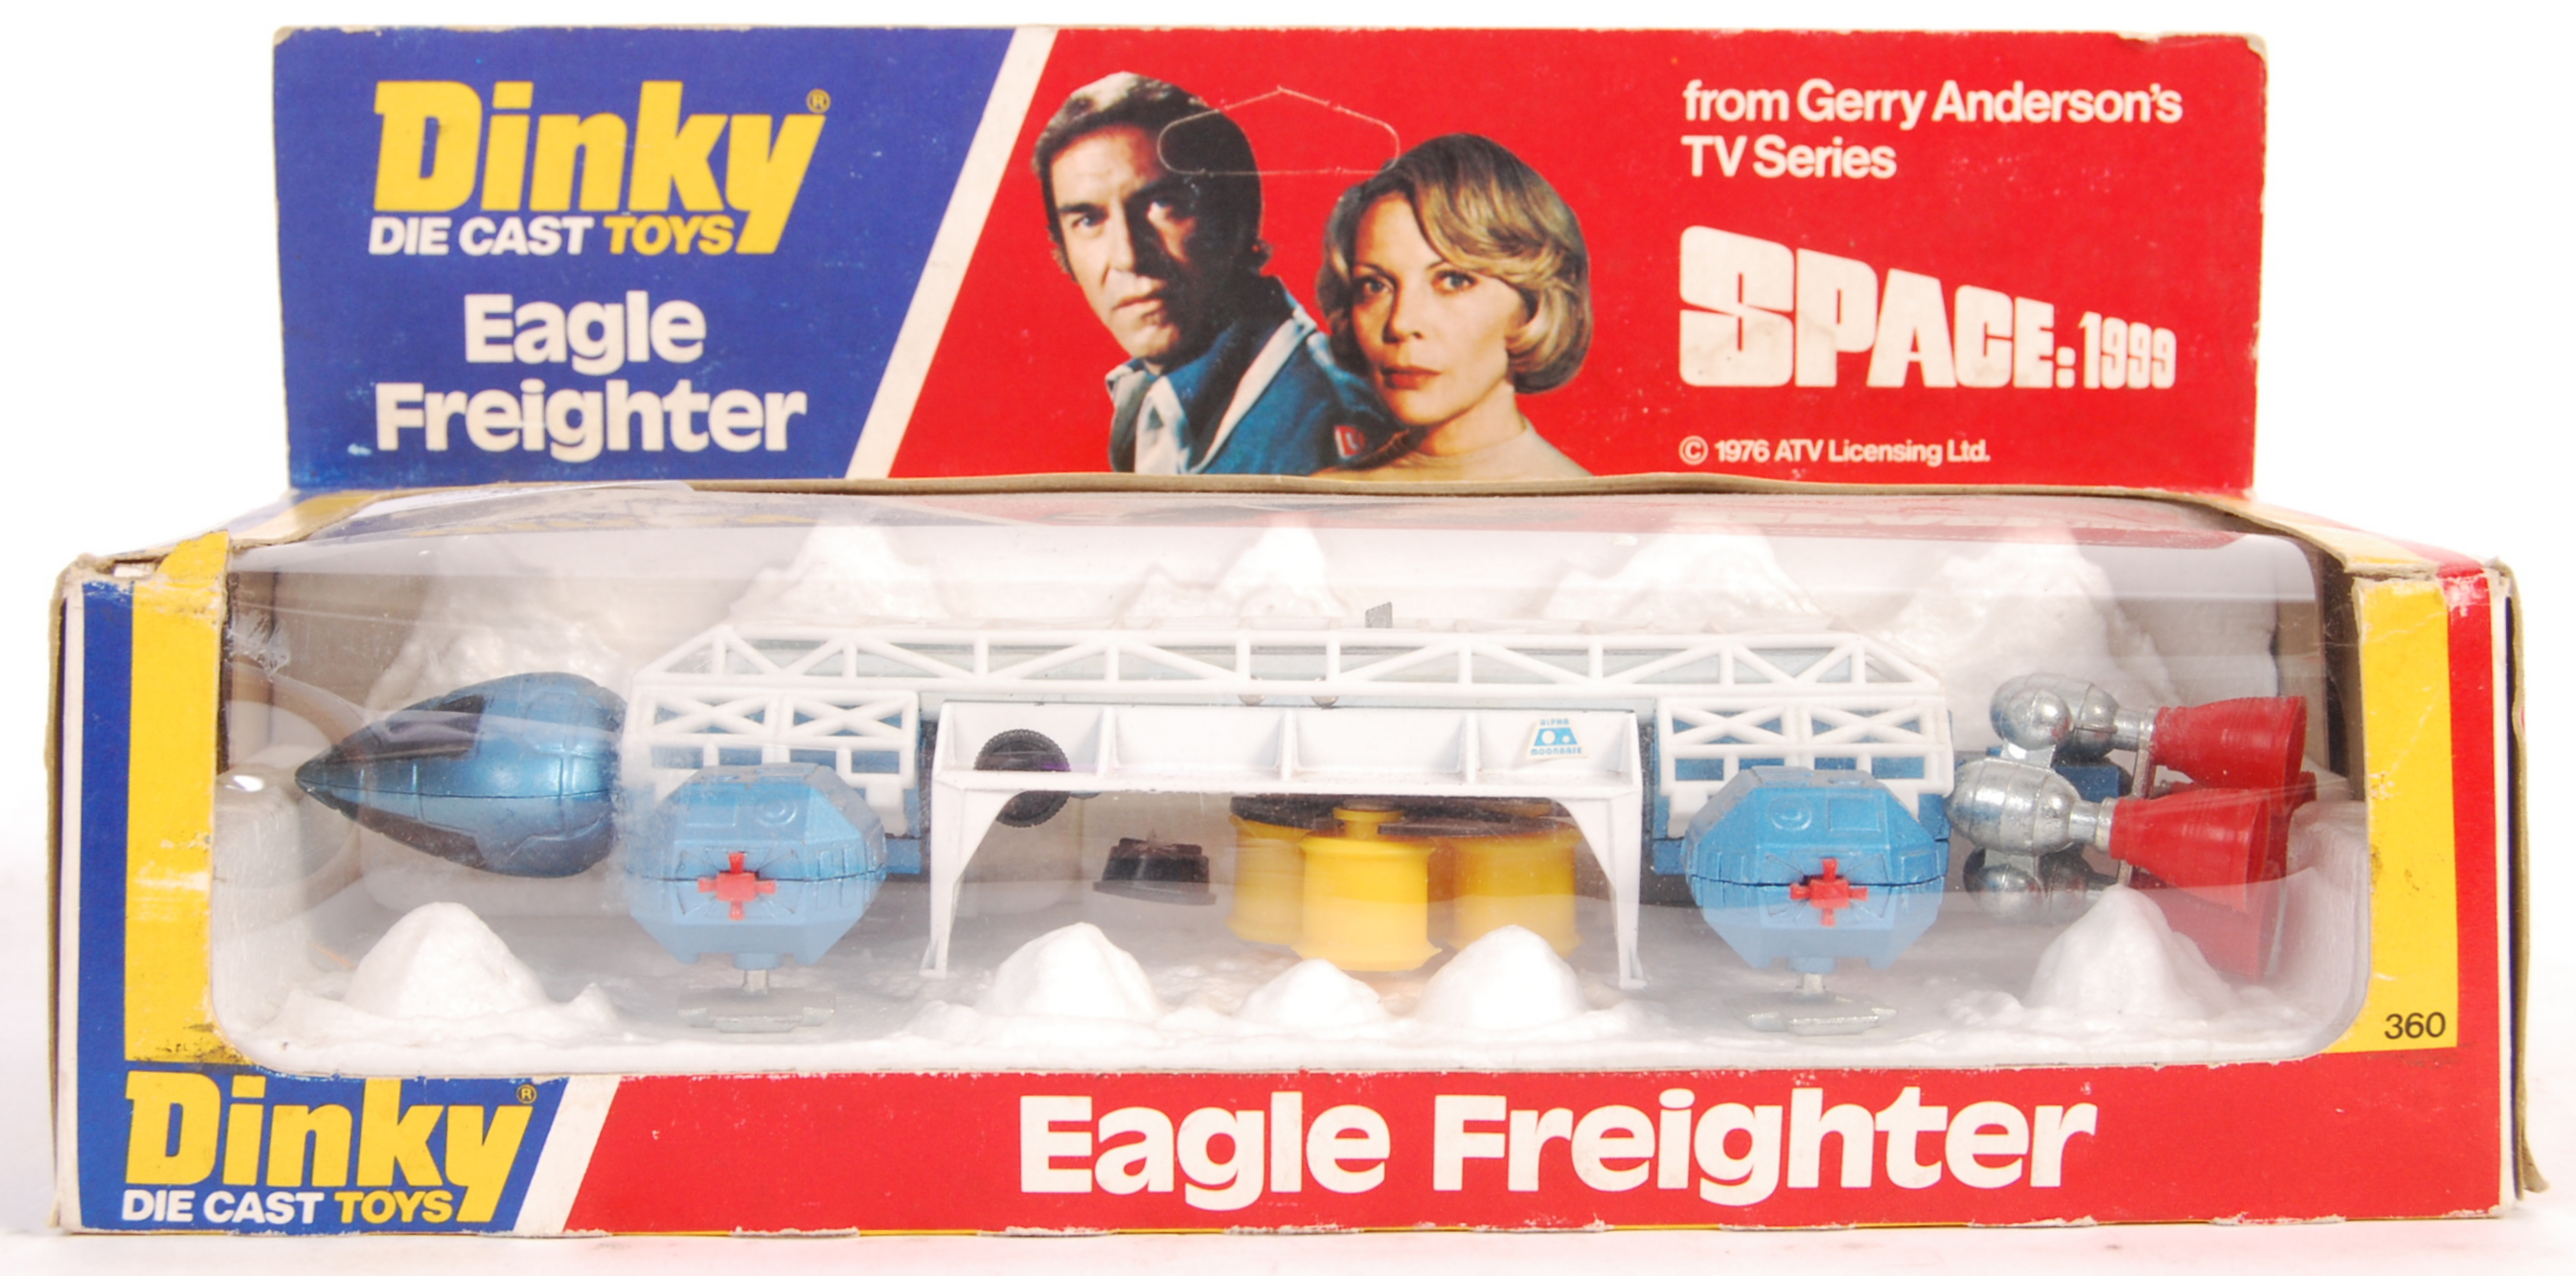 RARE VINTAGE DINKY TOYS SPACE 1999 EAGLE FREIGHTER